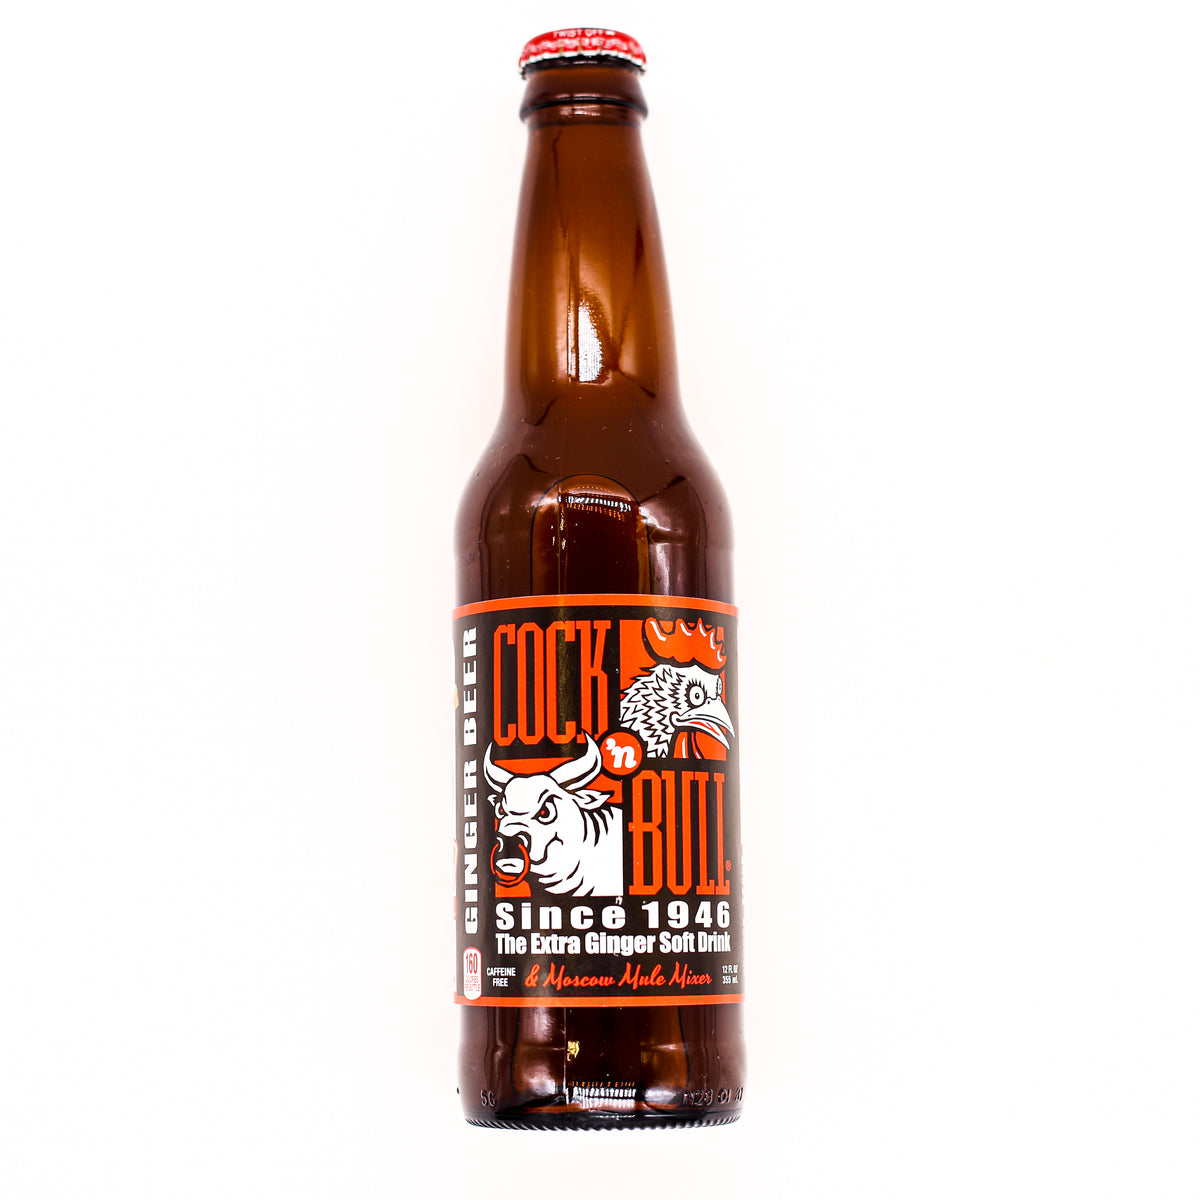 Cock and Bull Ginger Beer